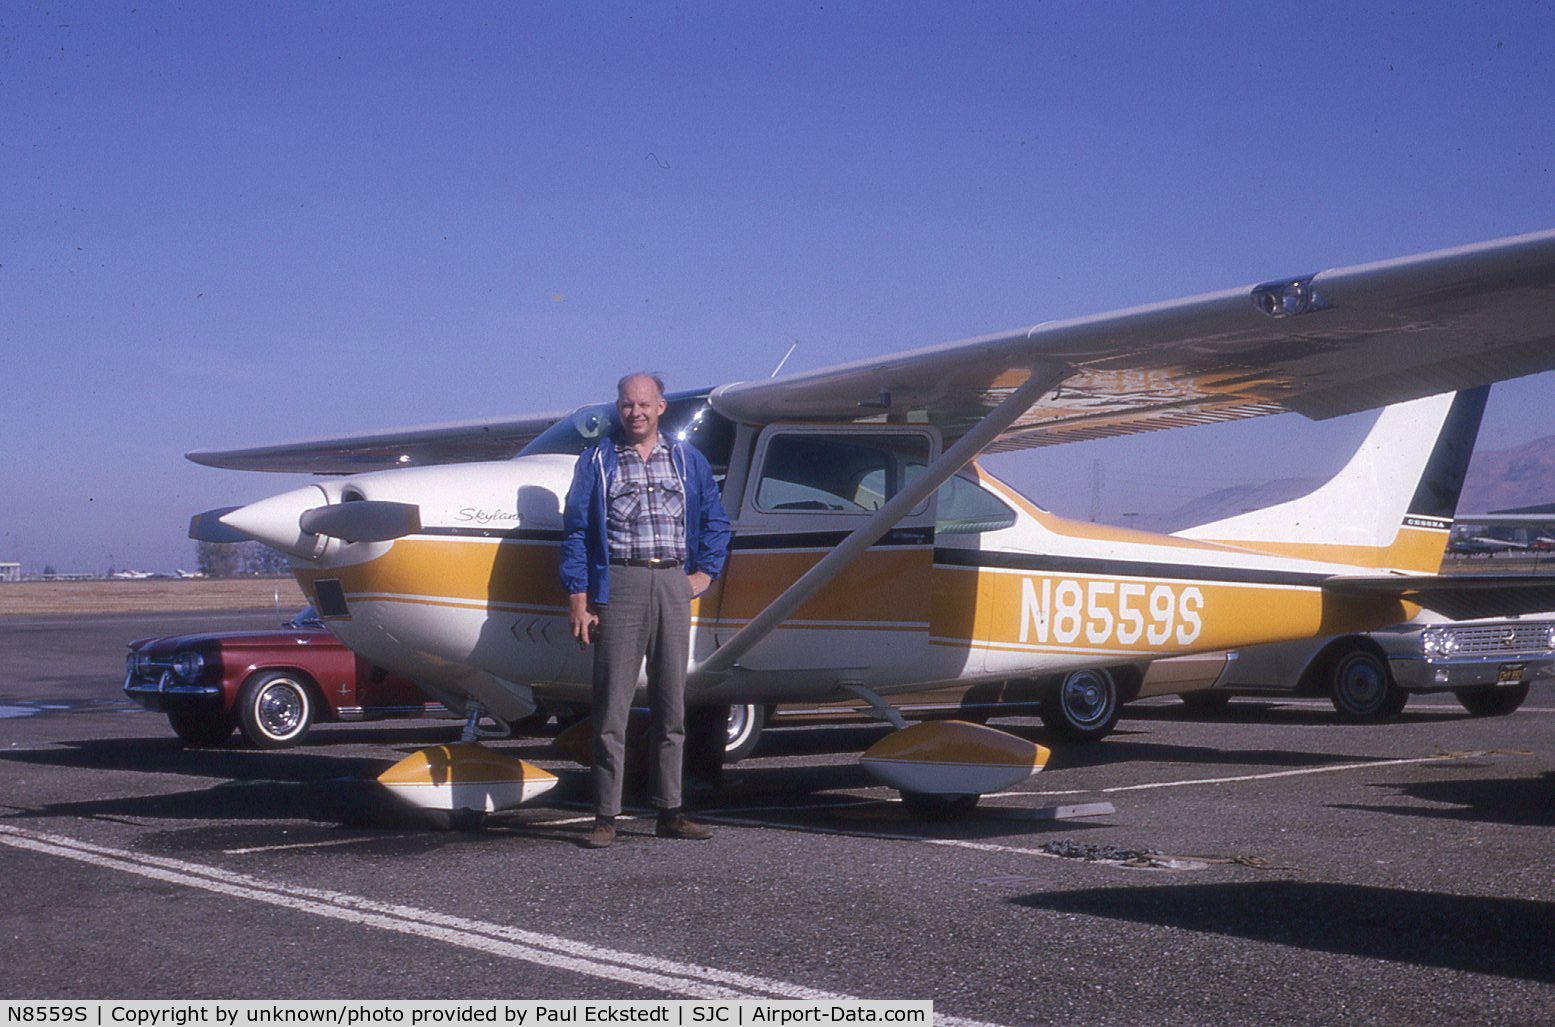 N8559S, 1965 Cessna 182H Skylane C/N 18256659, Found this slide of N8559S among other family slides.
My father (in photo) was heading out on a fishing trip with a friend in 1967.
Most likely taken at San Jose Airport.